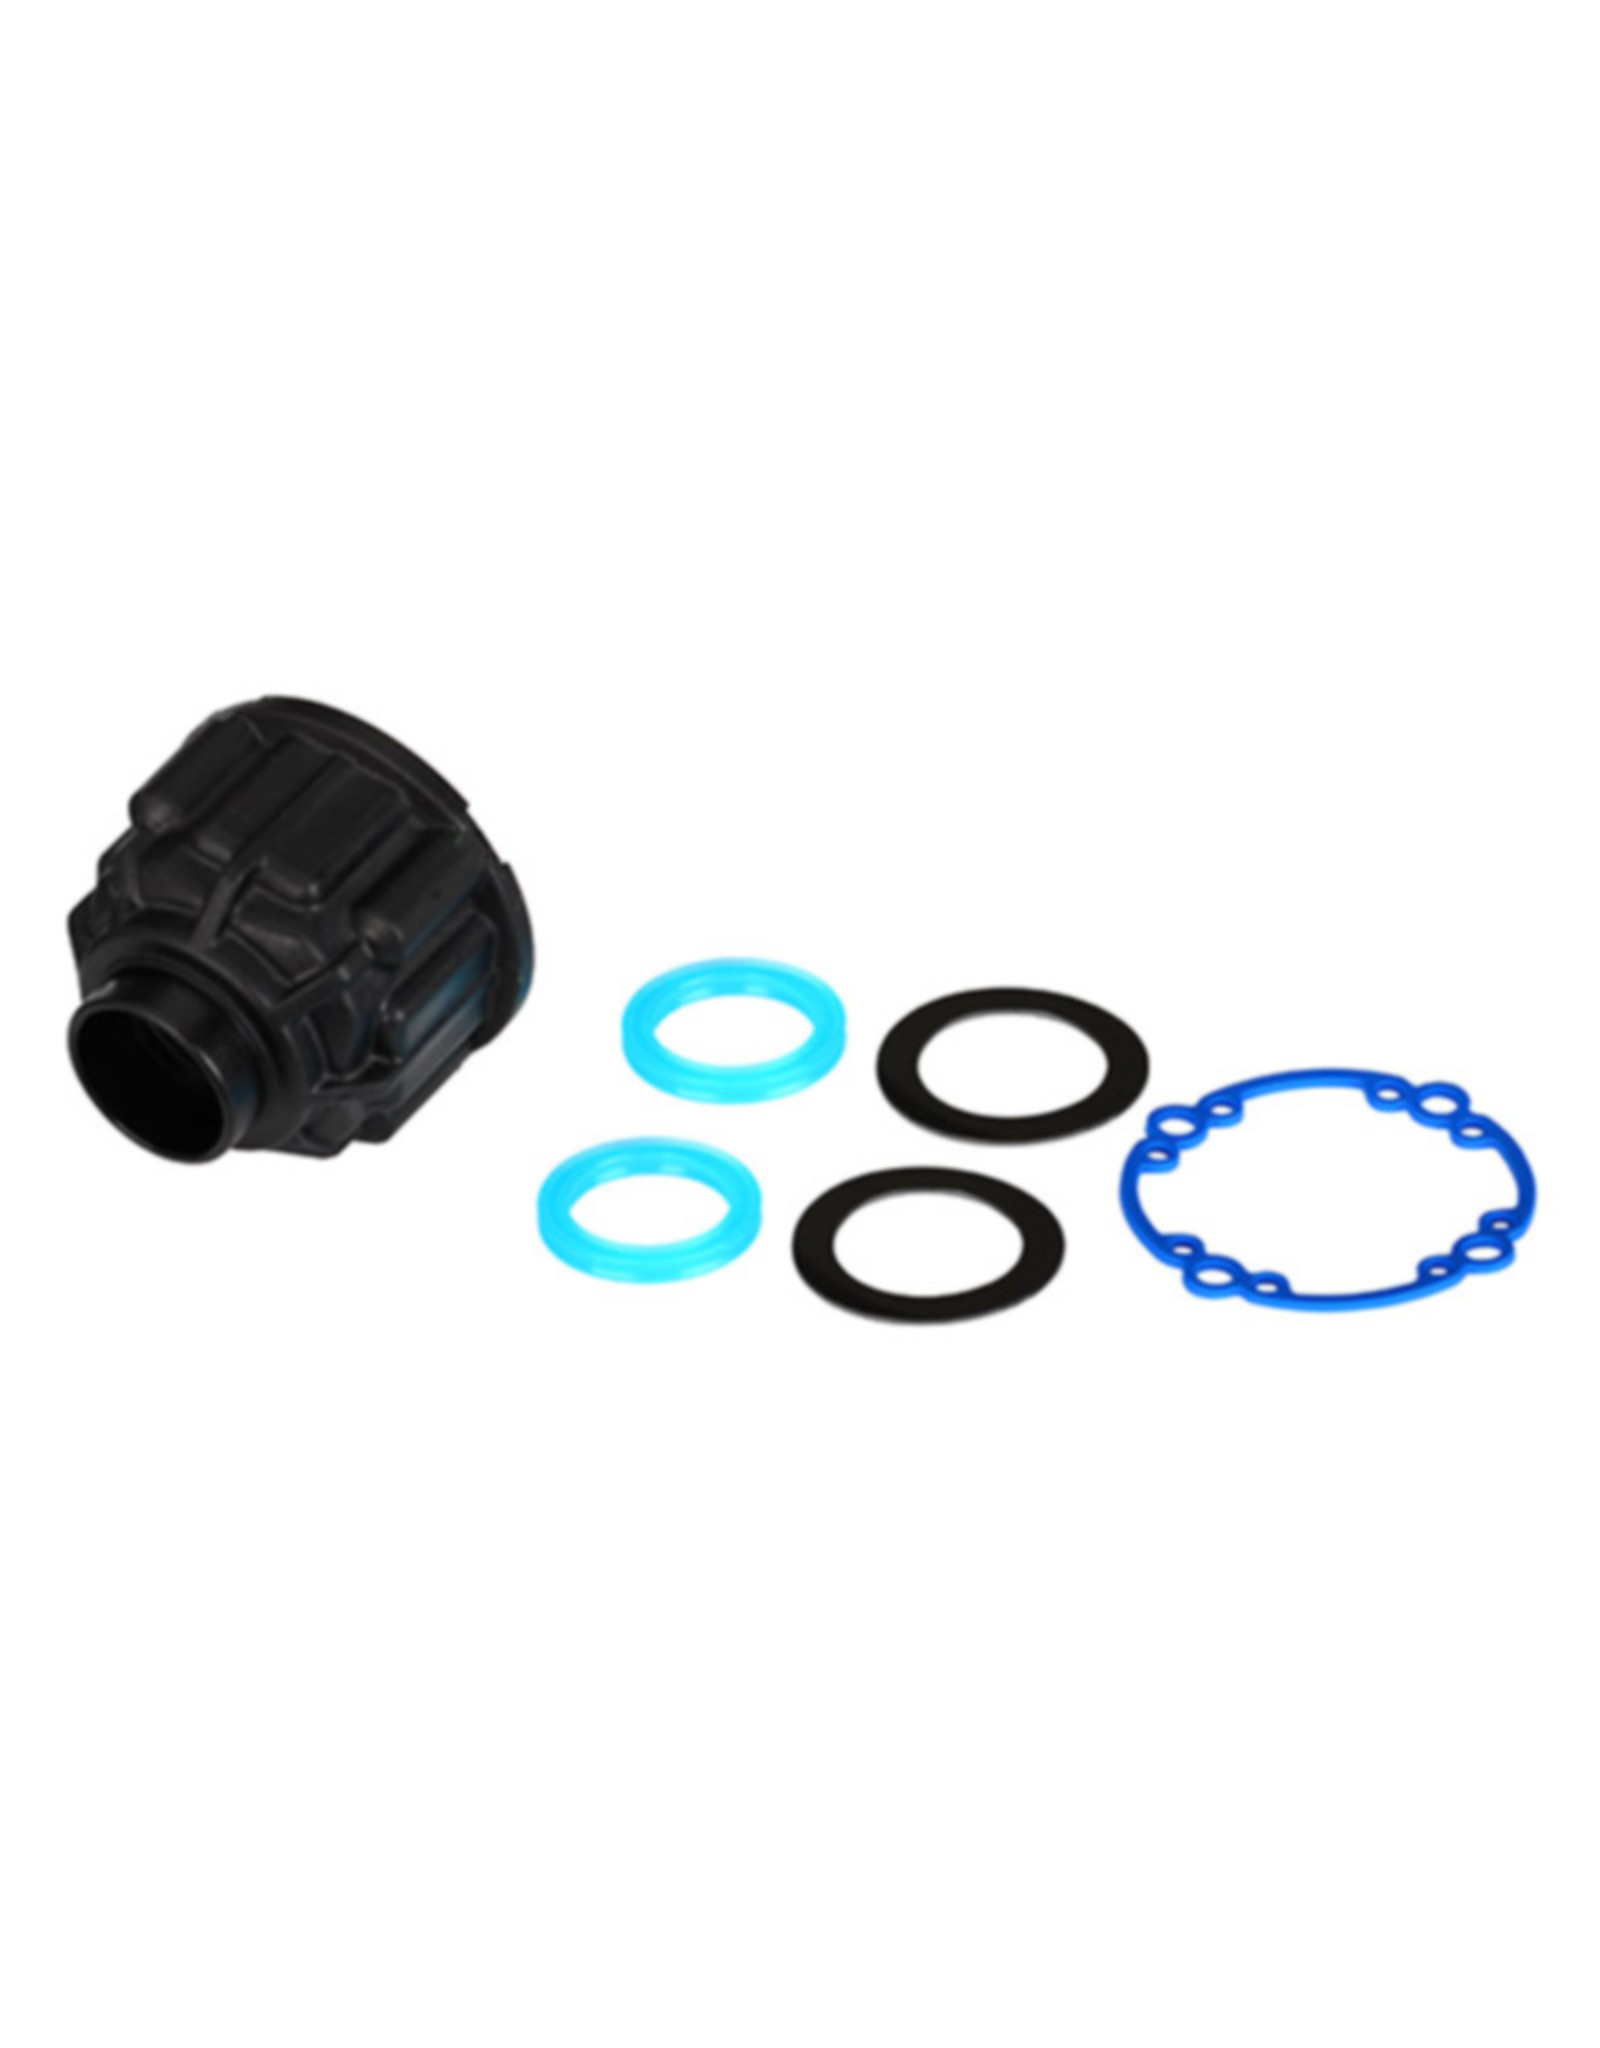 Traxxas TRA7781 Carrier Differential/X-Ring Gaskets (2)